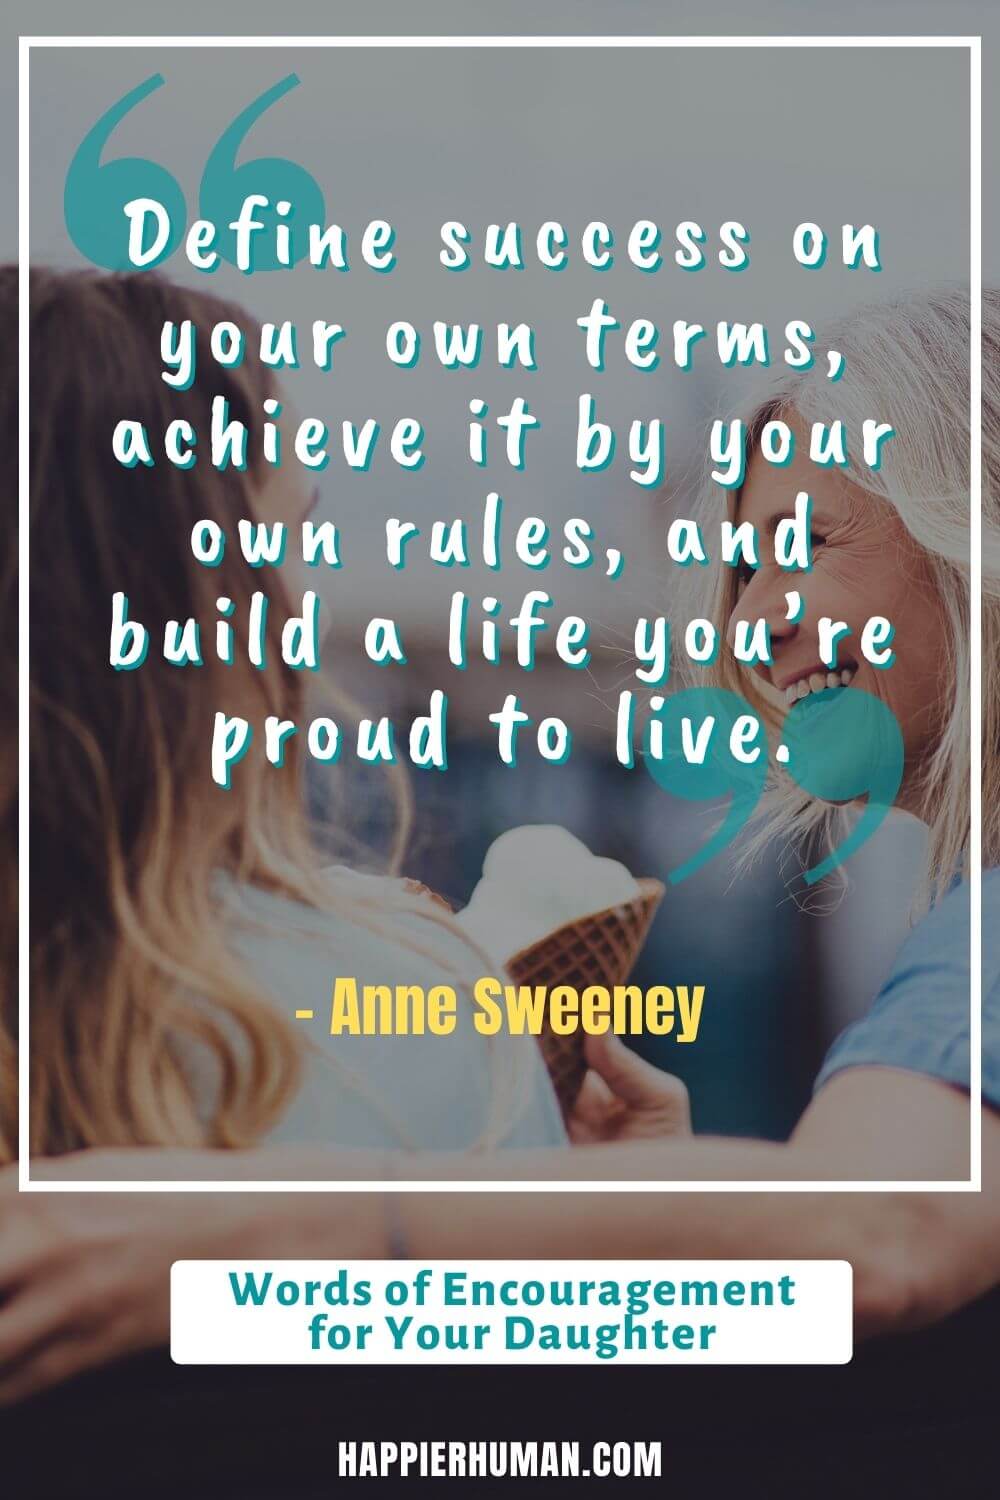 Words of Encouragement for Daughter - “Define success on your own terms, achieve it by your own rules, and build a life you’re proud to live.” - Anne Sweeney | my daughter quotes | words of encouragement for my daughter before a test | daughter quotes from mom